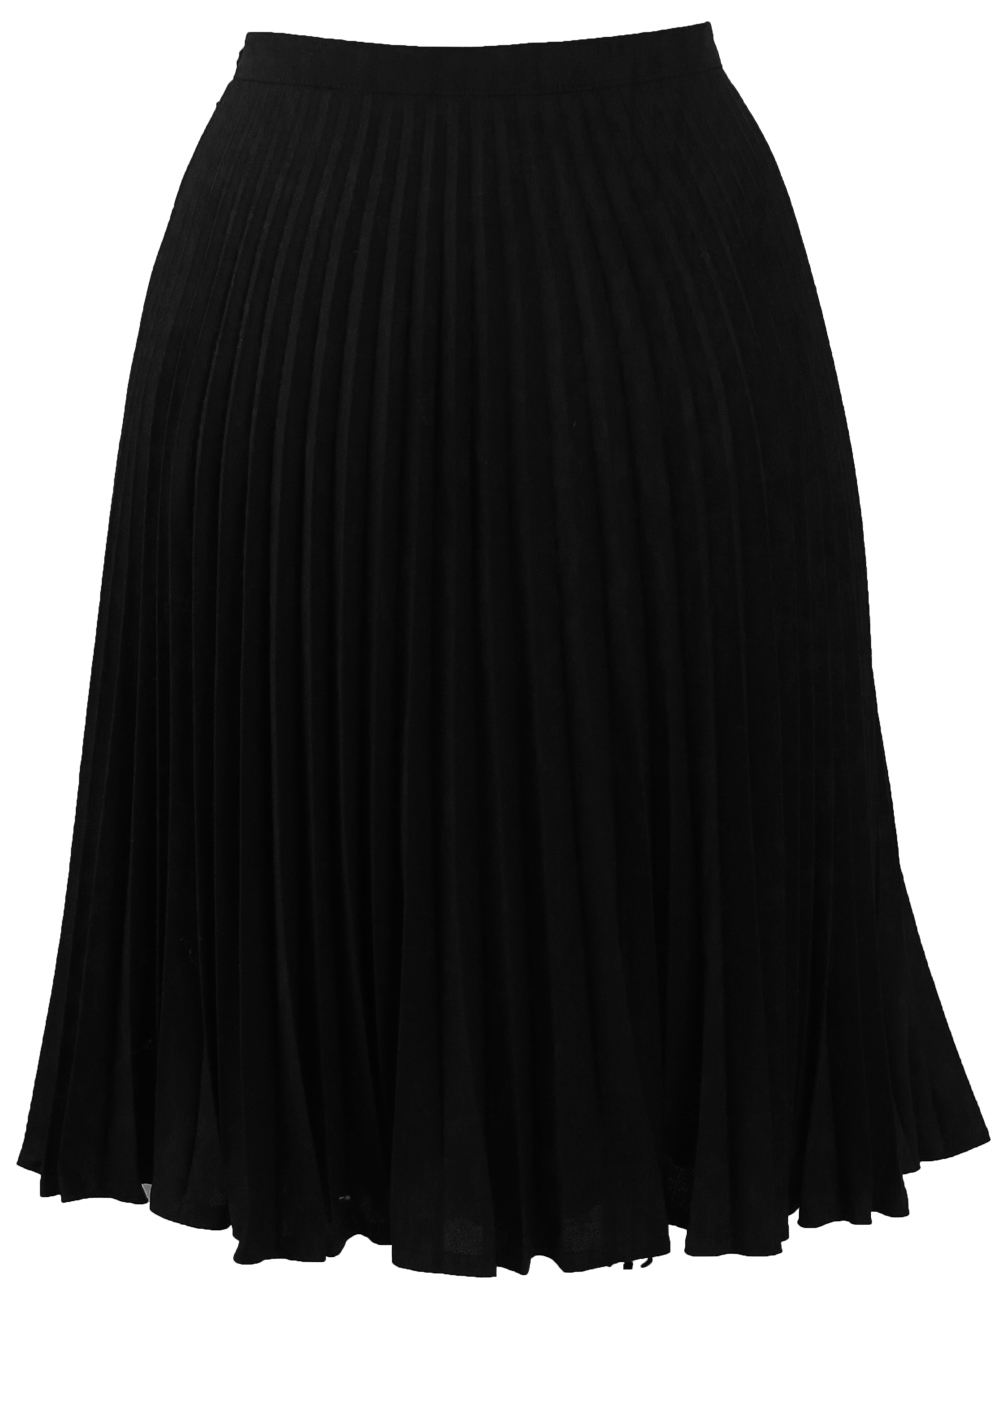 Black Knee Length Flared Skirt with Tight Pleat Detail - S/M | Reign ...